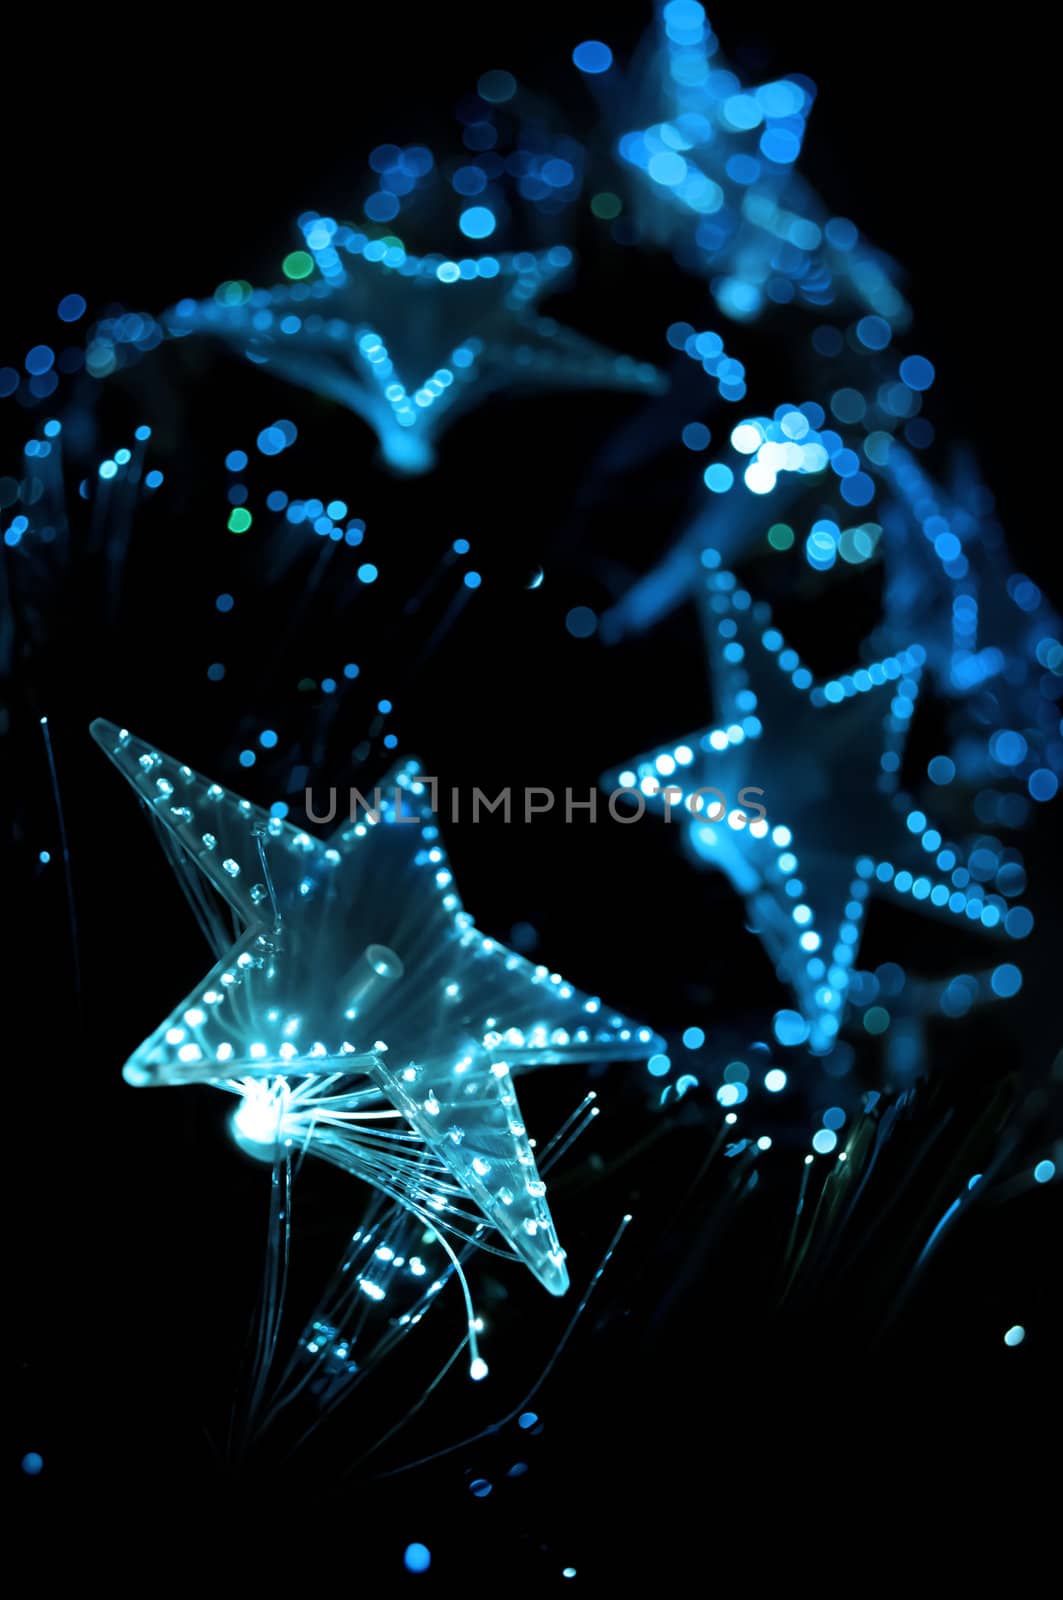 A view from the base of a Christmas tree with illuminated blue lights. Focus on foreground lights with black background.